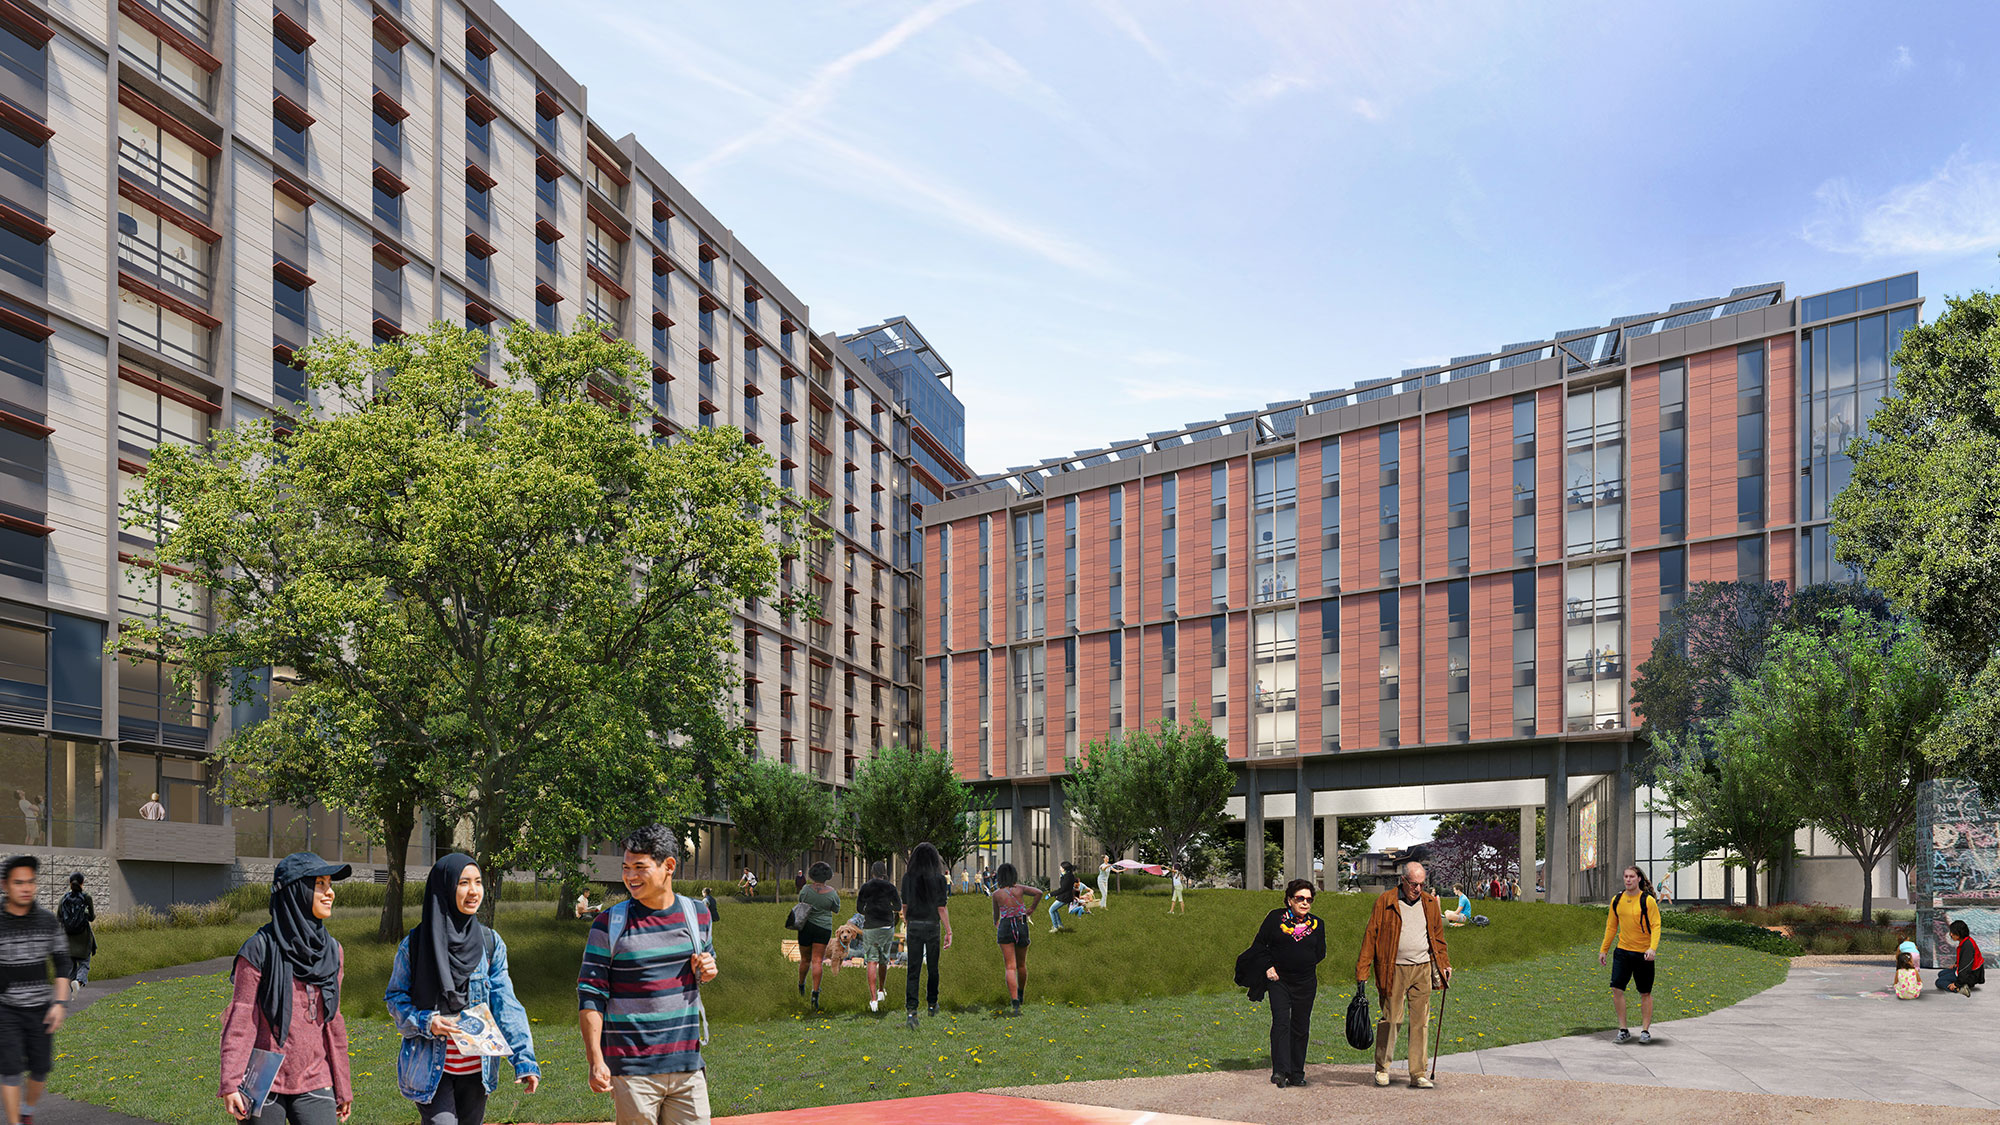 A rendering of planned student housing at the People's Park construction site. The building sits behind a large lawn that is filled with socializing people.